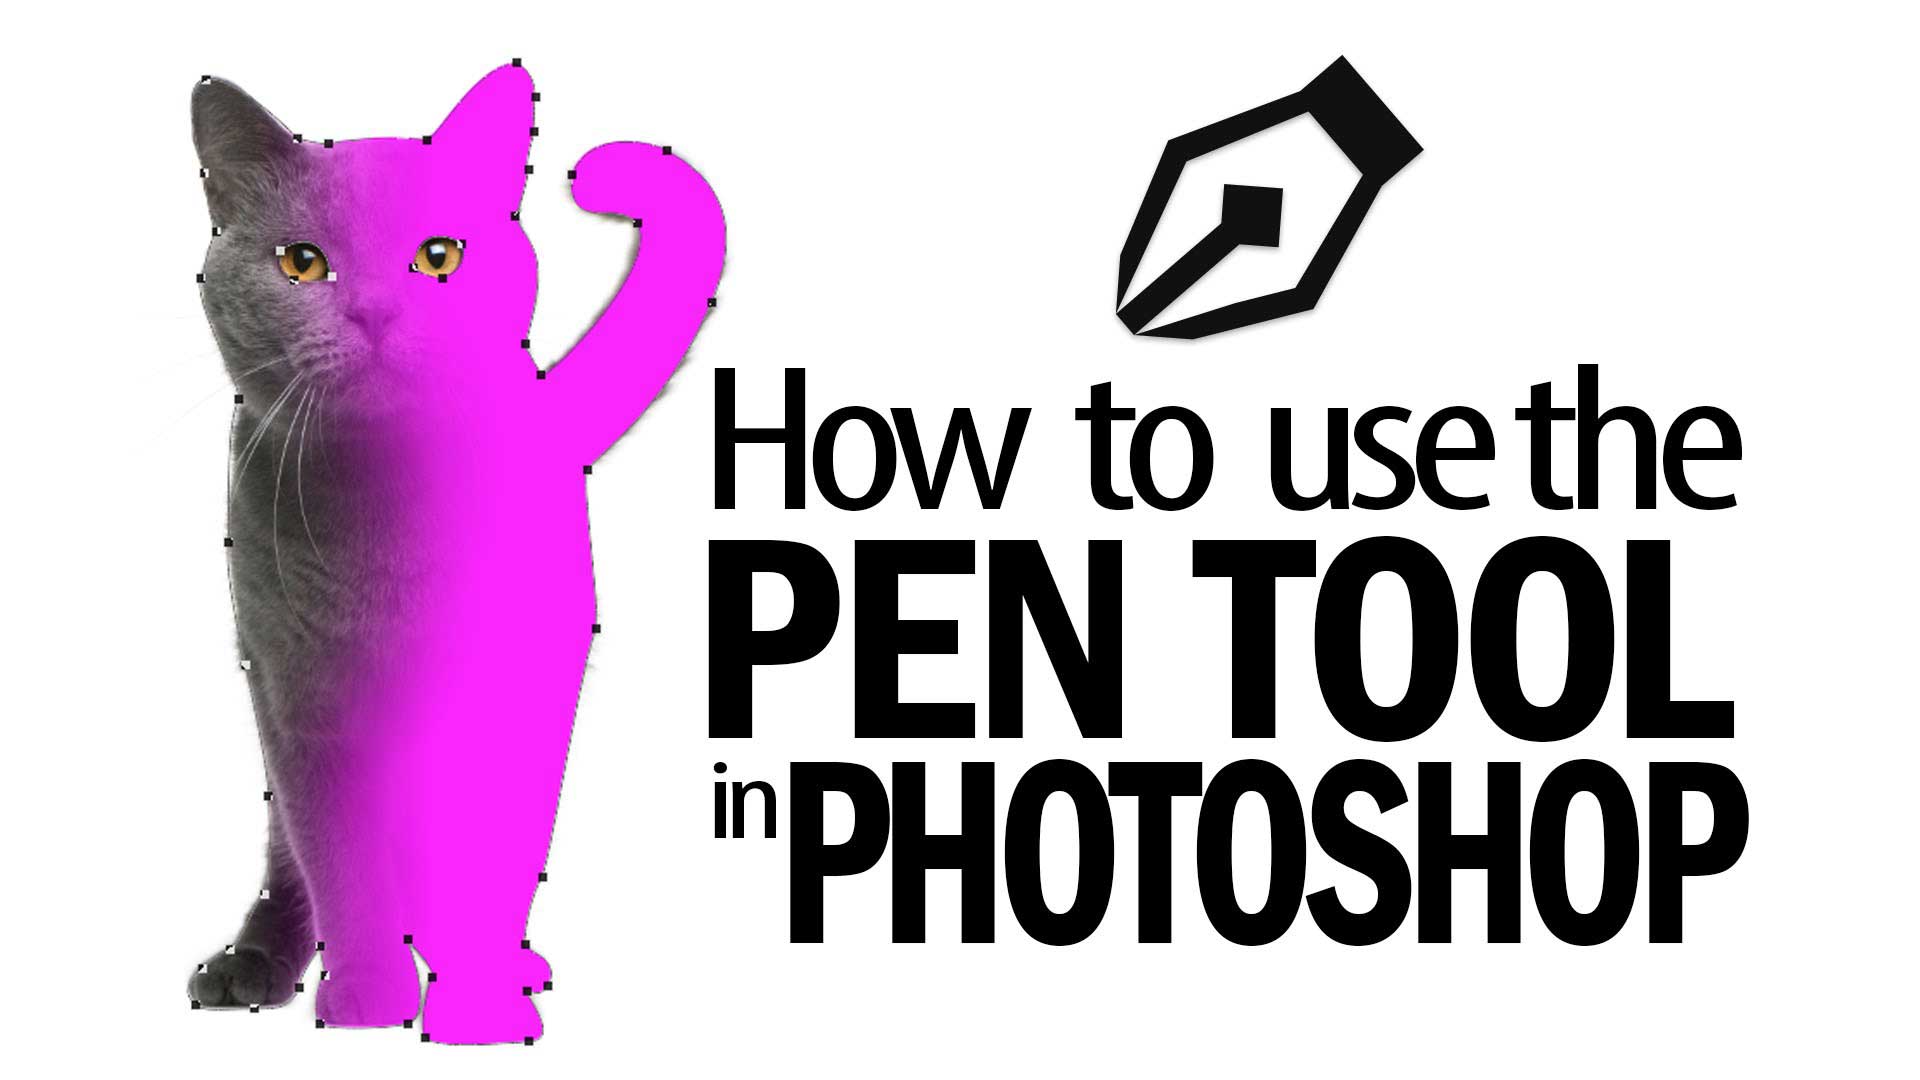 How to use Photoshop pen tool